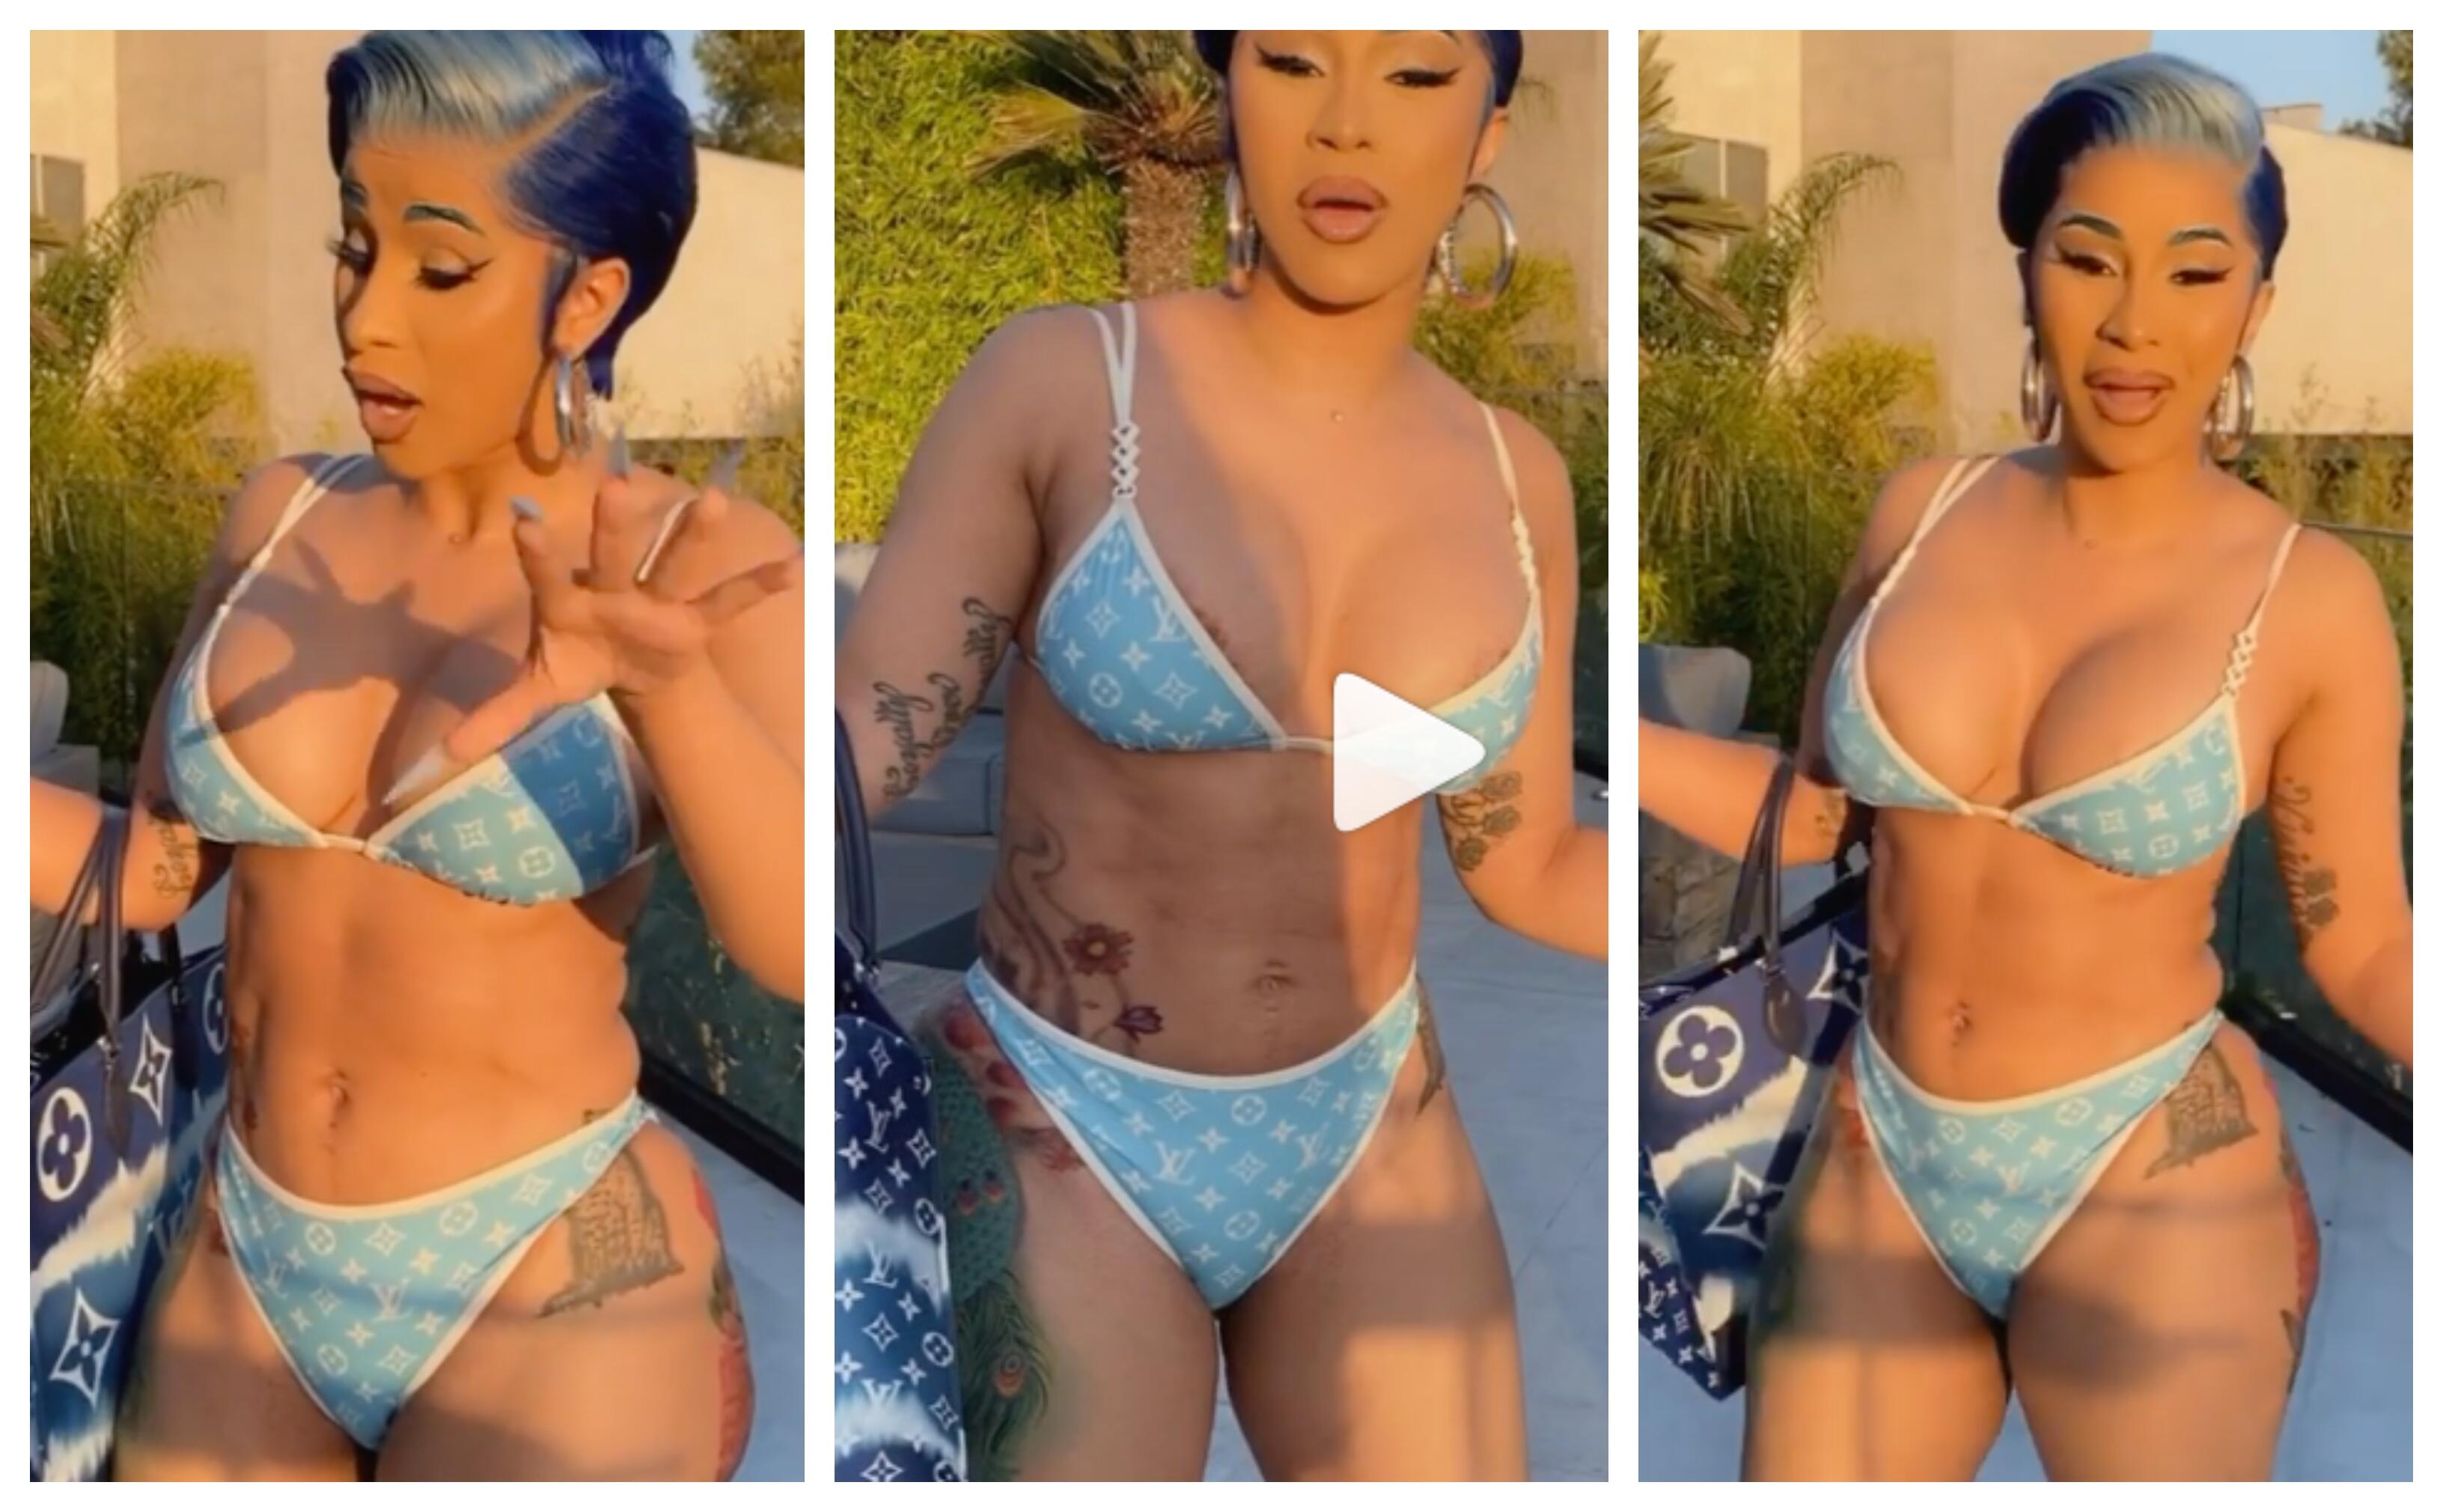 Cardi B Says 'Target' Pics Were Edited To Make Her Look Square